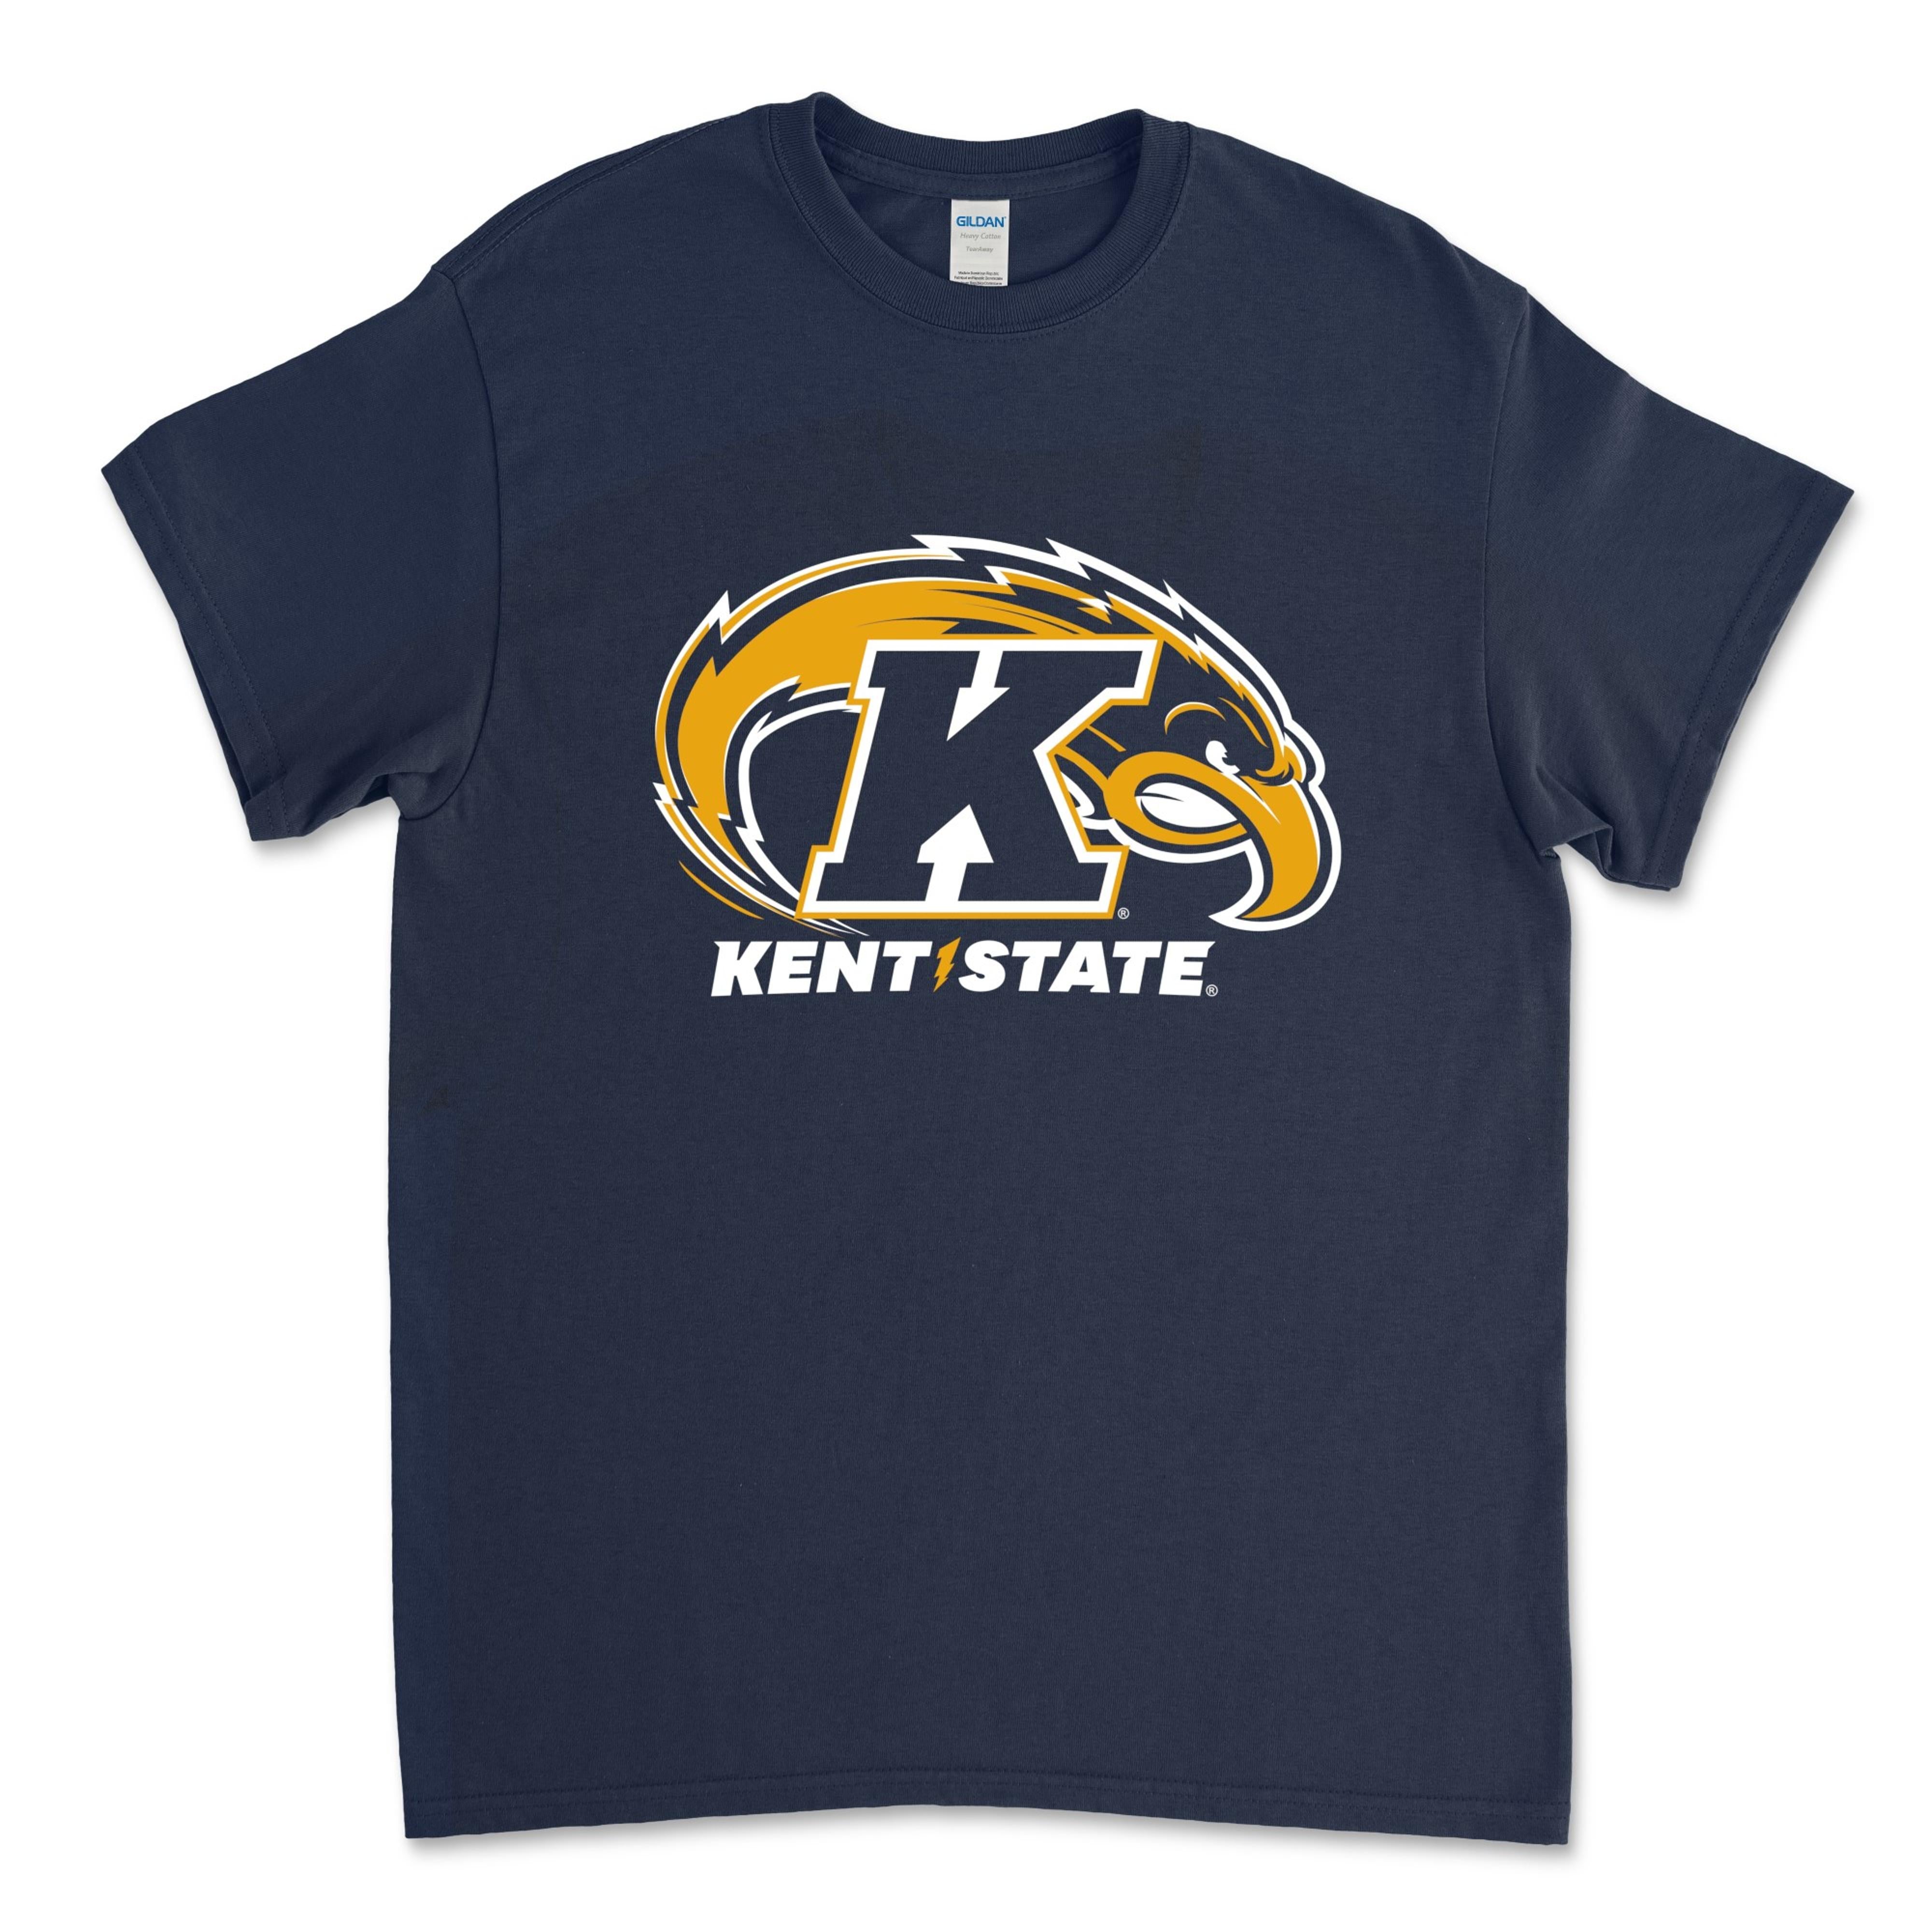 Kent State Navy Youth T-Shirt